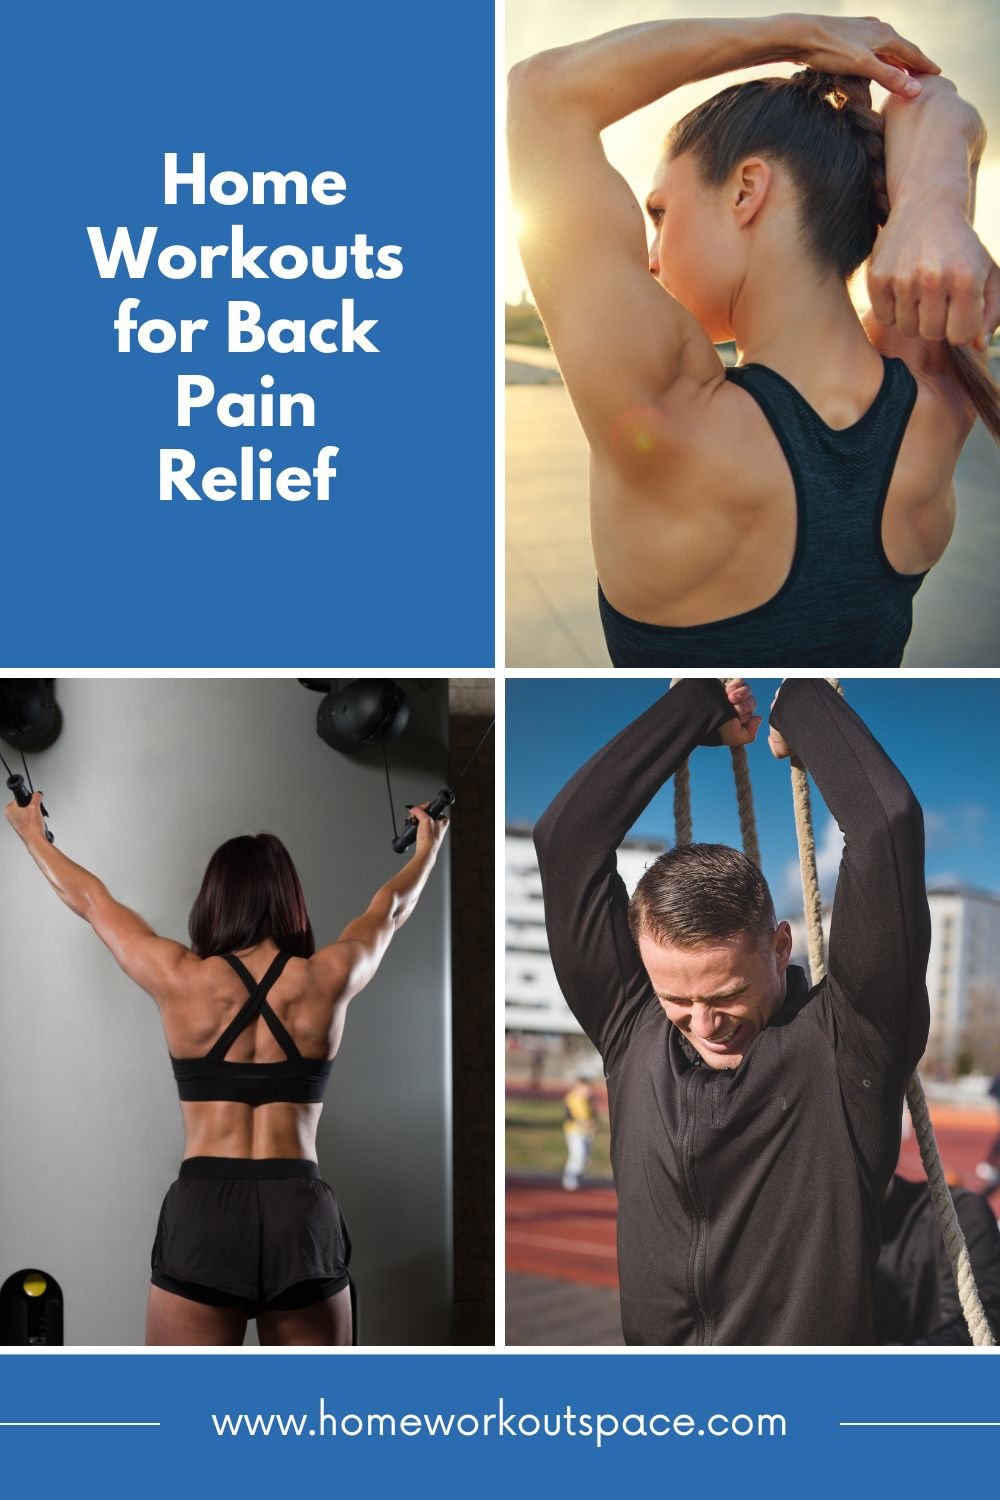 Home Workouts for Back Pain Relief